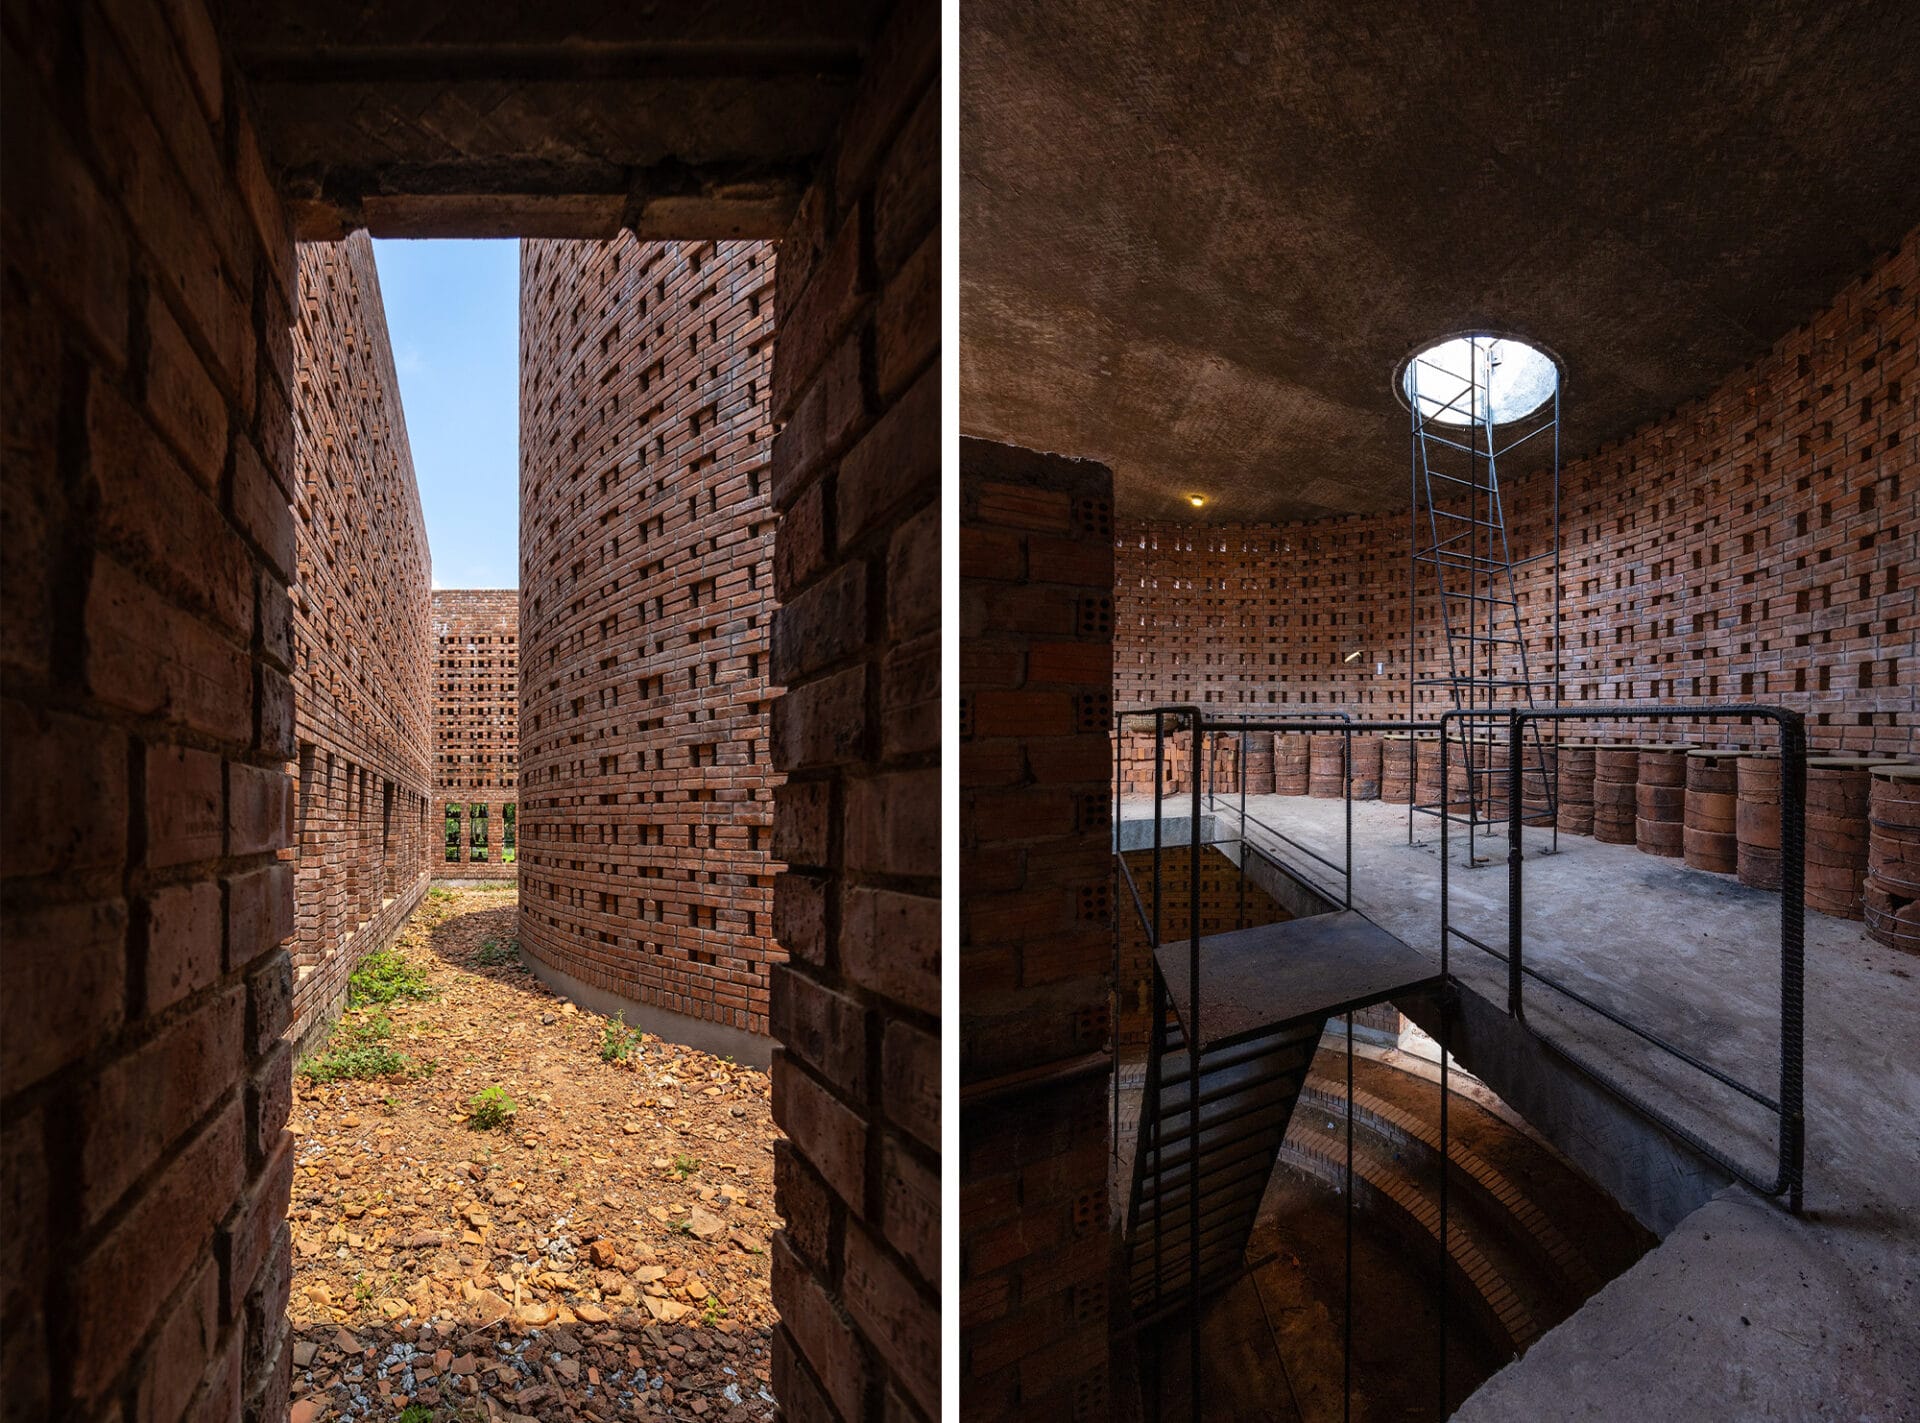 two side-by-side images of the interior of a terra cotta workshop building made of lattice-patterned brick walls